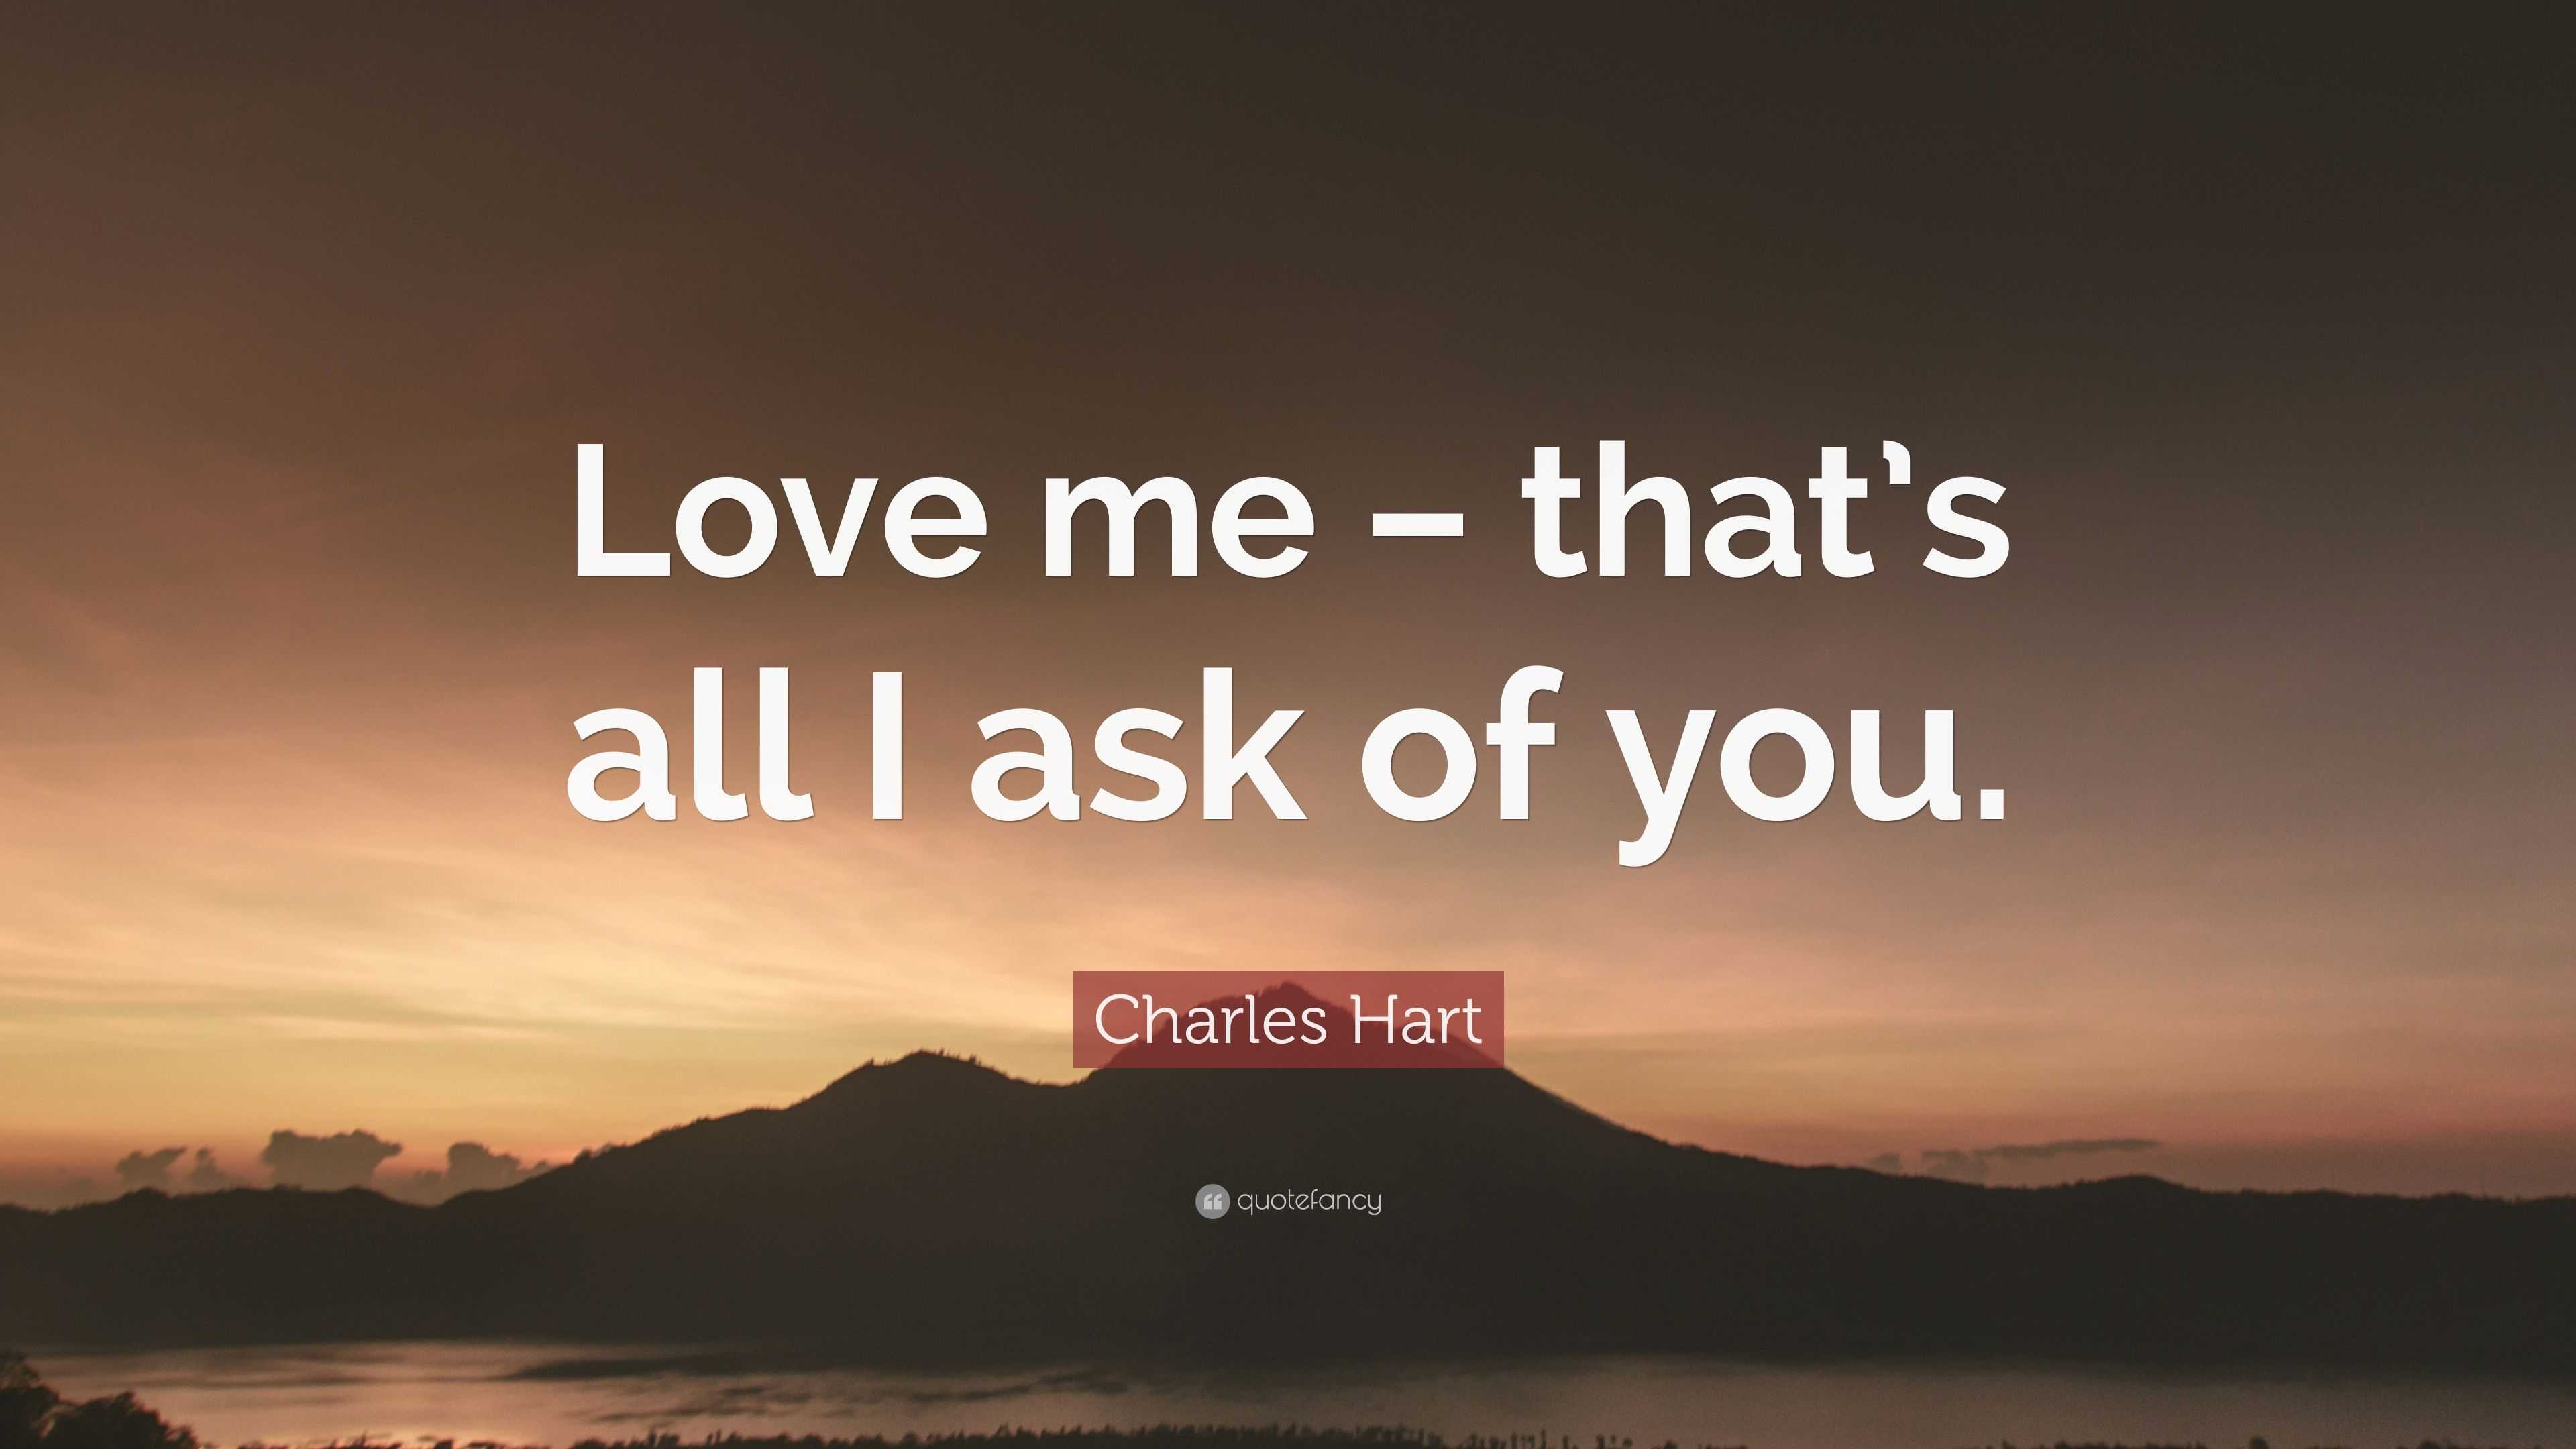 Charles Hart Quote: “Love me – that’s all I ask of you.”